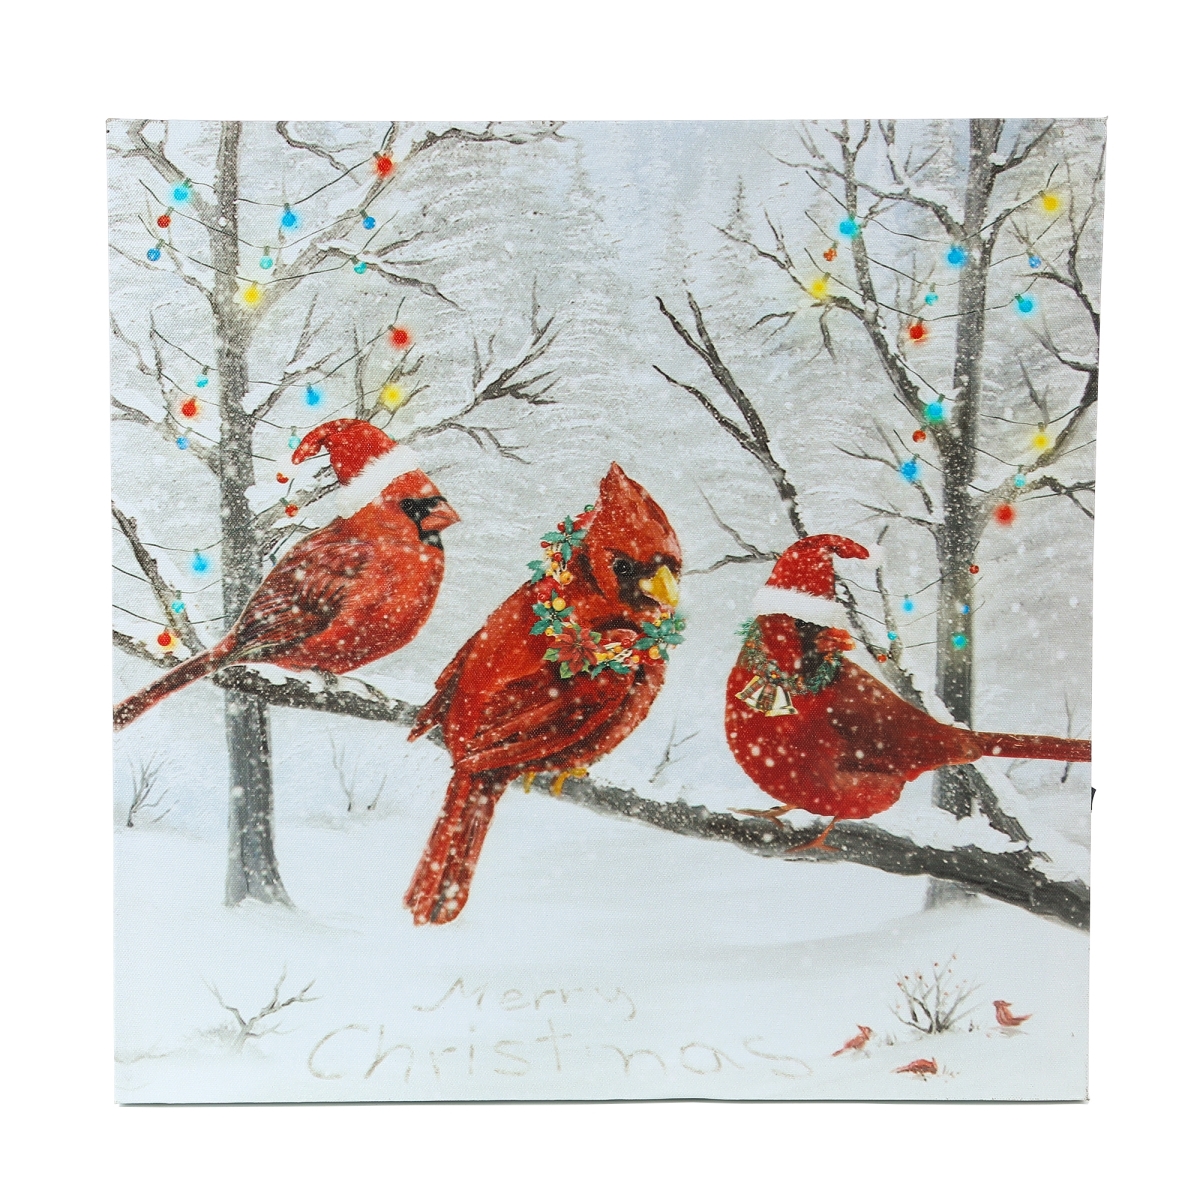 Wha658 Winter Wonderland Red Cardinals Canvas Print Wall Art With Led Lights